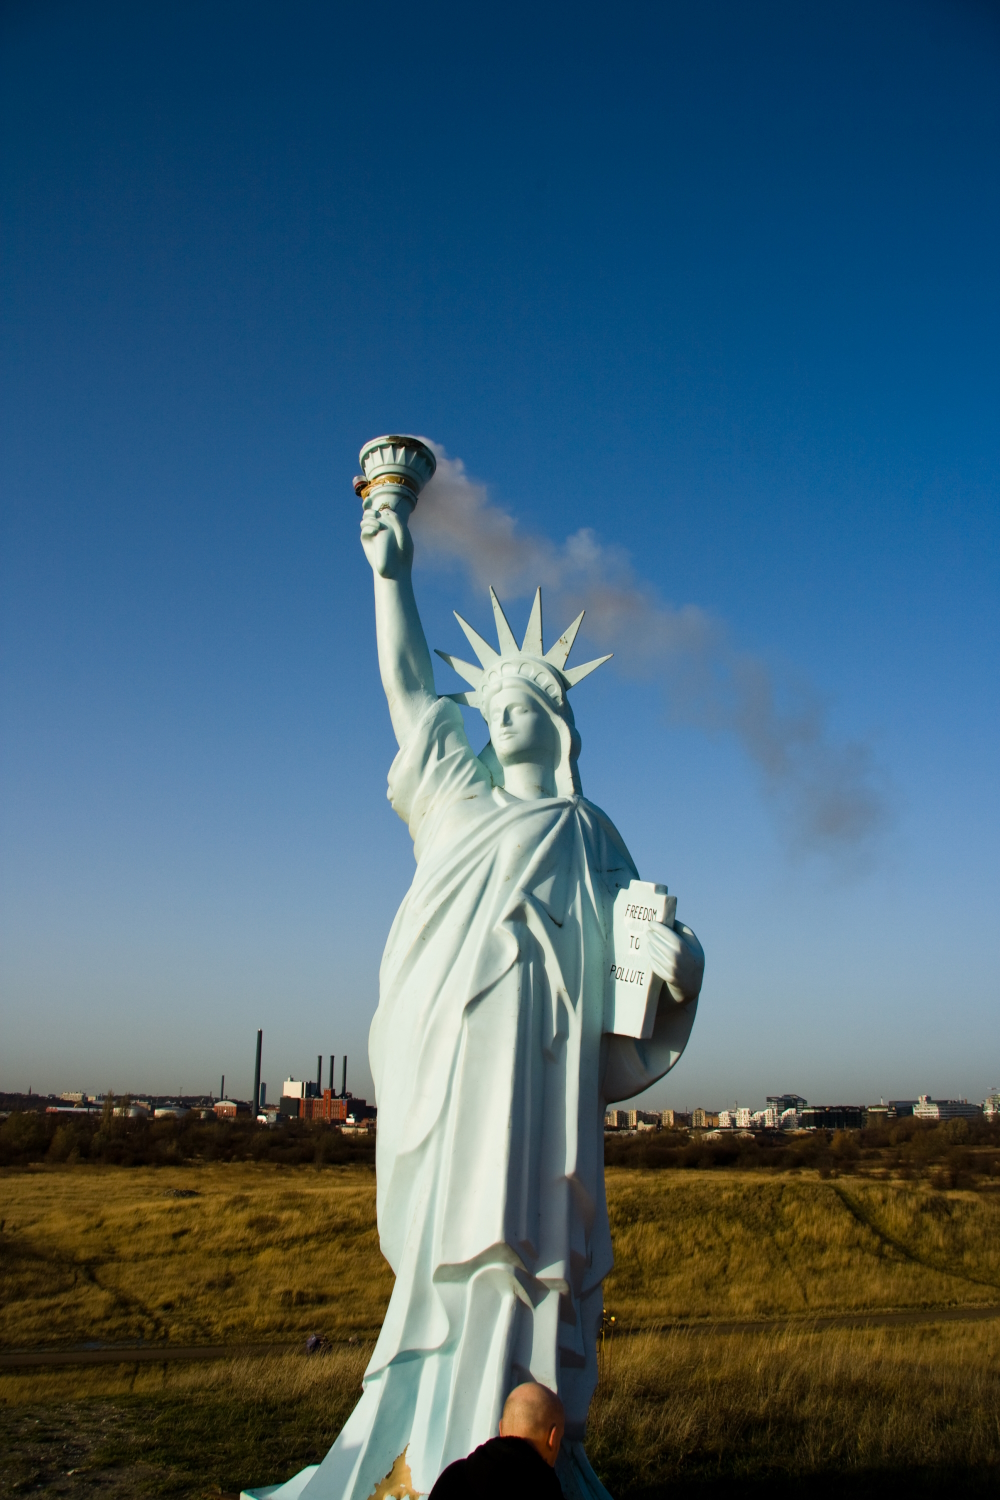 'Freedom To Pollute': the 6-foot-high fiberglass replica of the American Statue of Liberty, featuring smoke emitting from the torch, created a dialogue about the Western civilization individual thoughts about freedom.